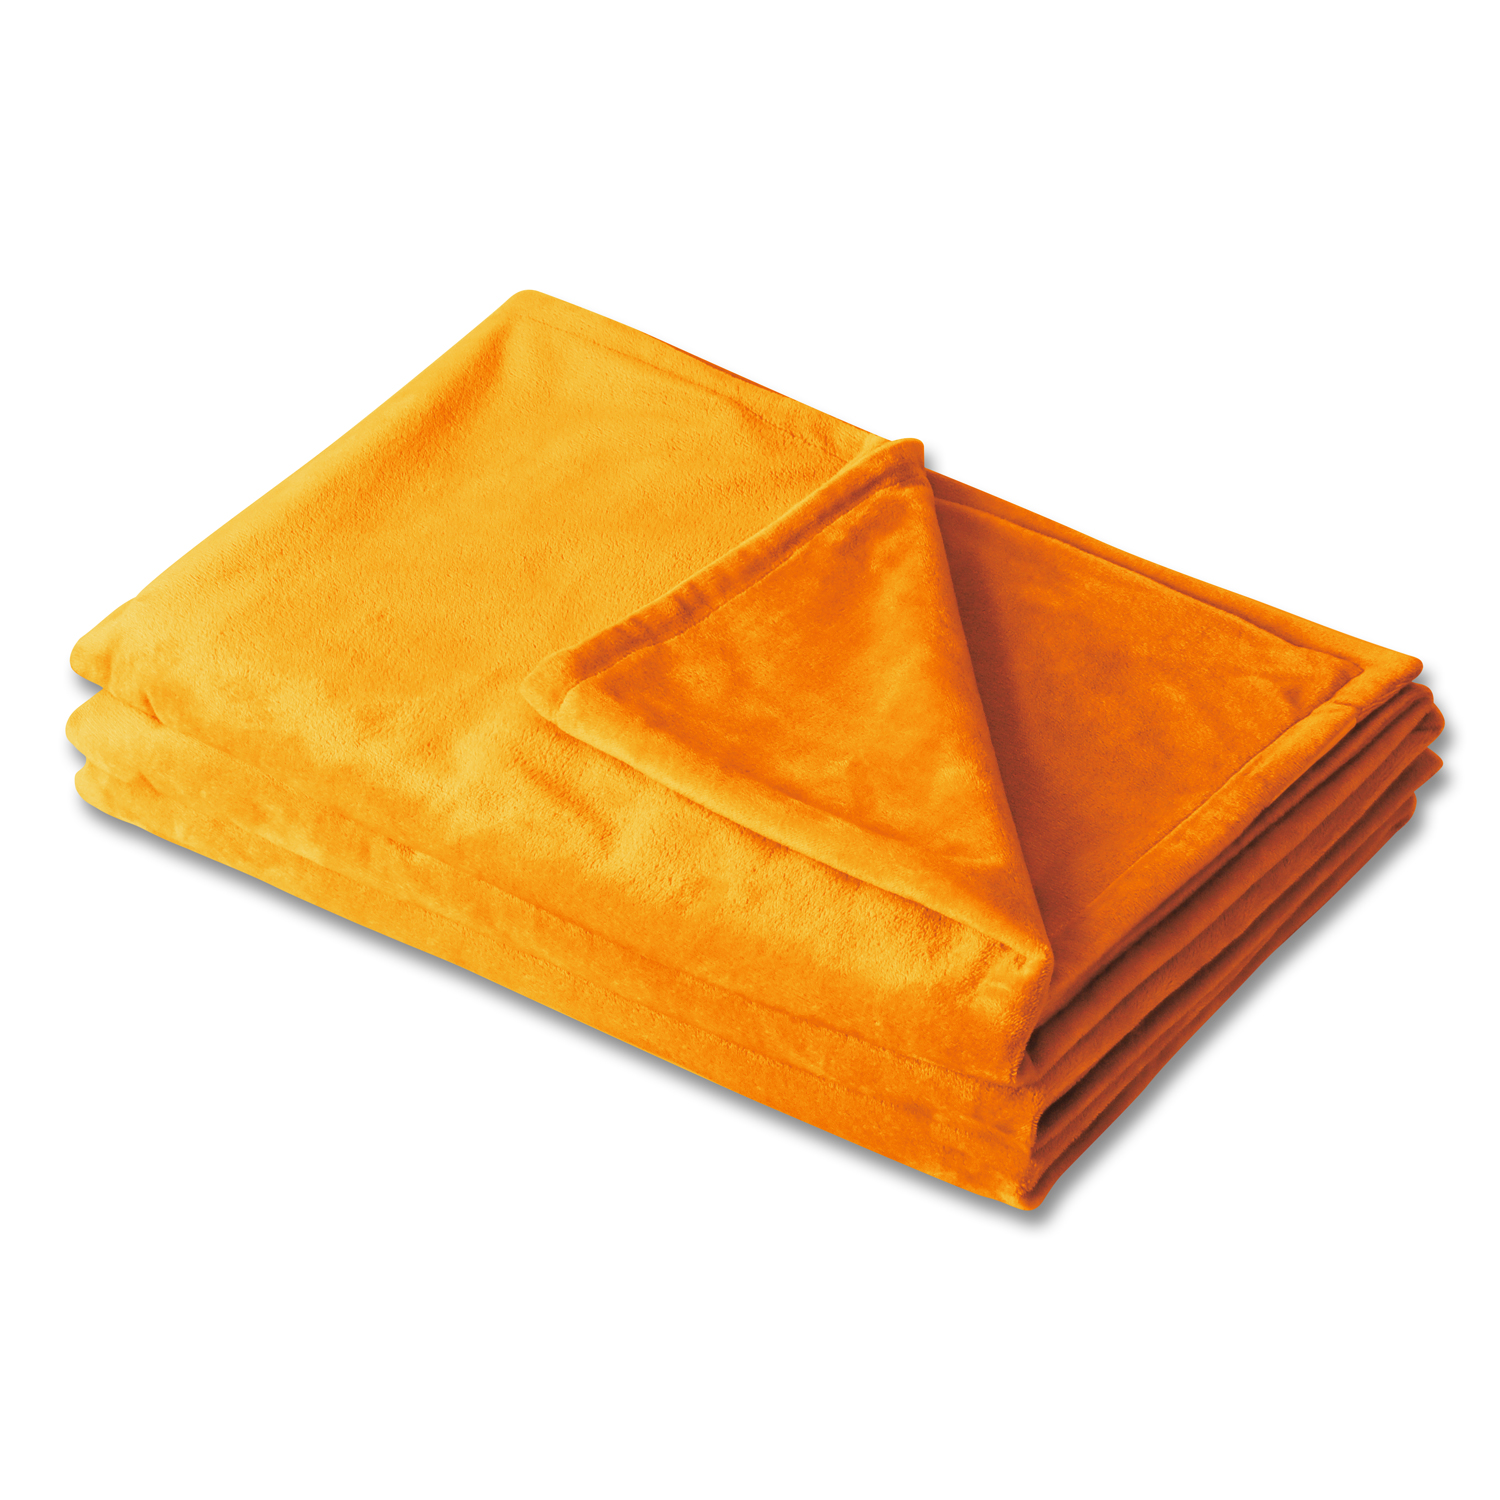 AmpleSky Duvet Cover for Weighted Blankets (48 Inch x 72 Inch) Orange